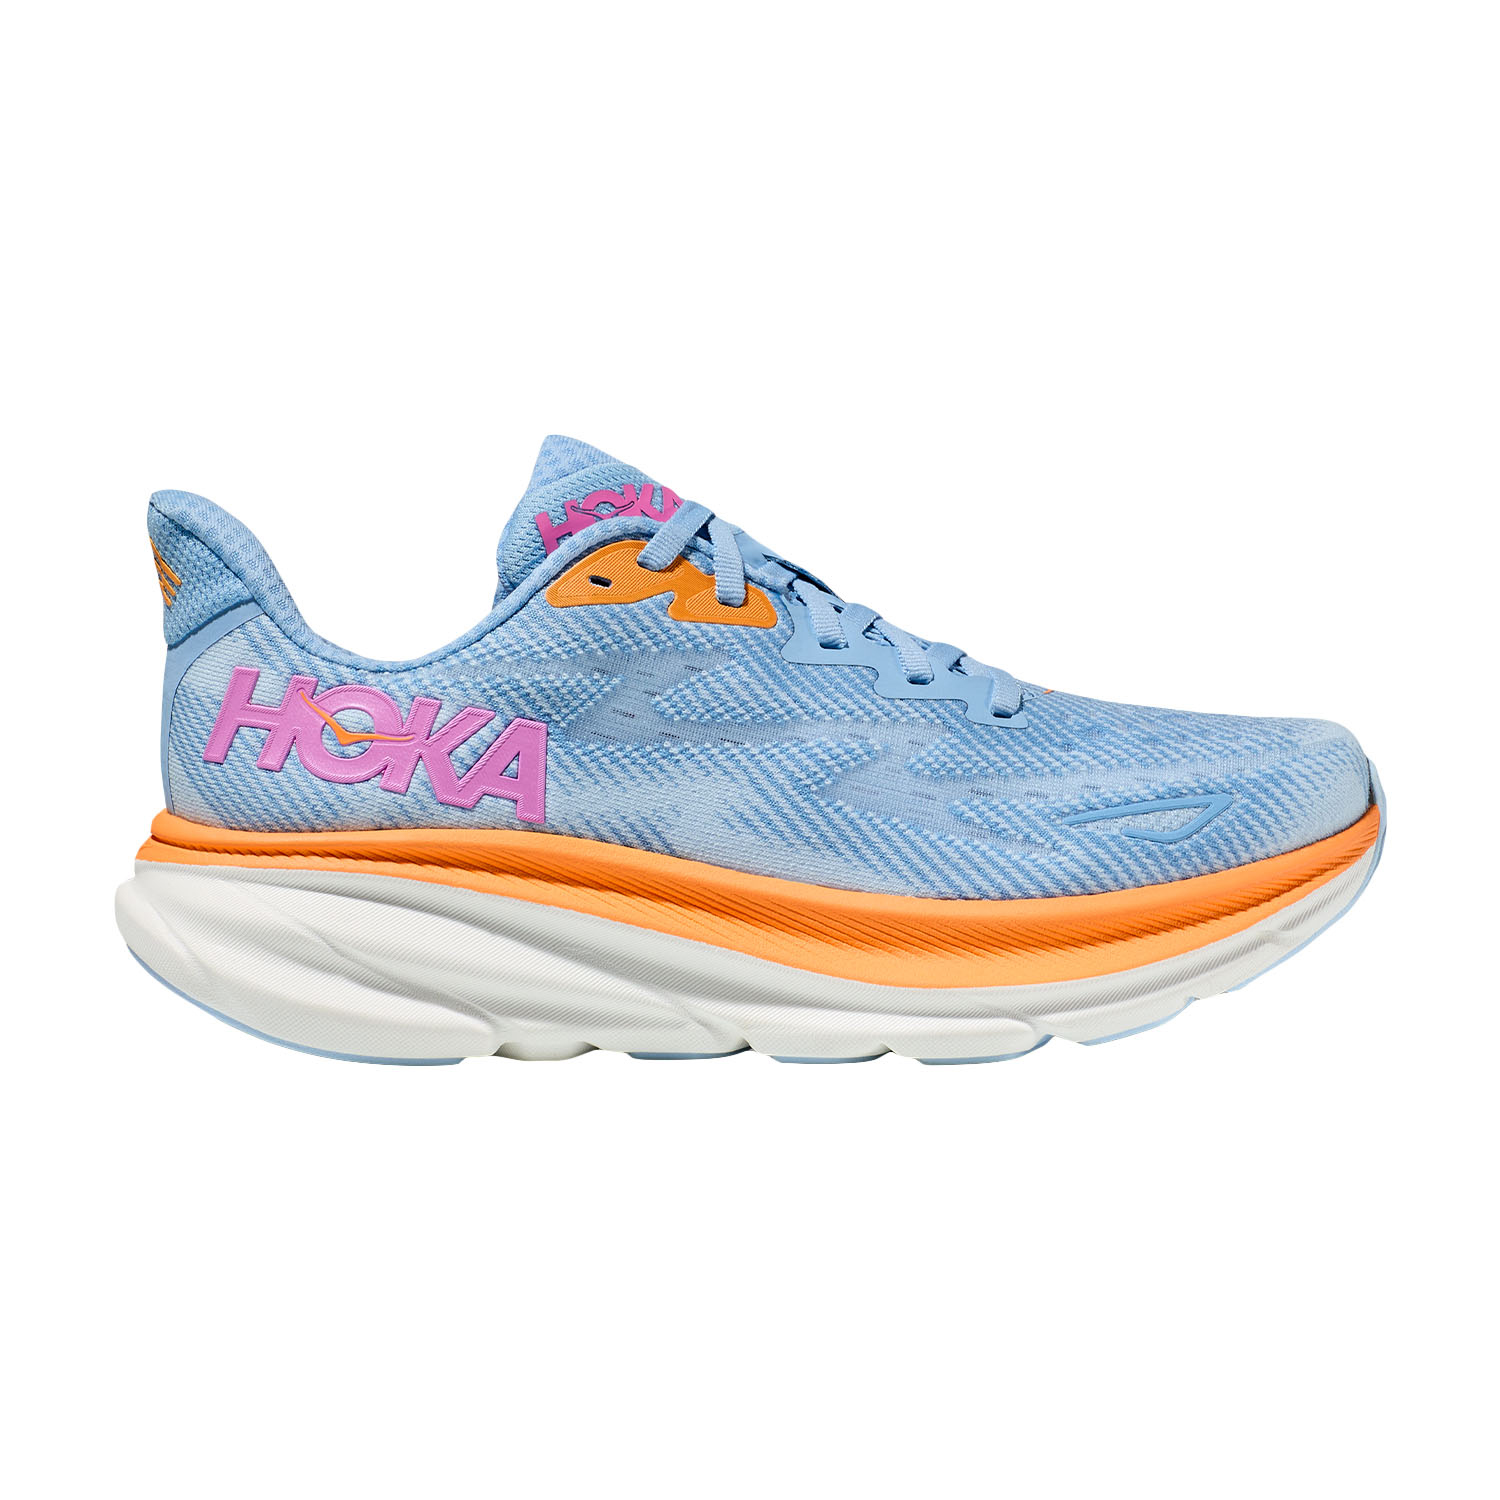 Hoka One One Clifton 9 Women's Running Shoes - Airy Blue